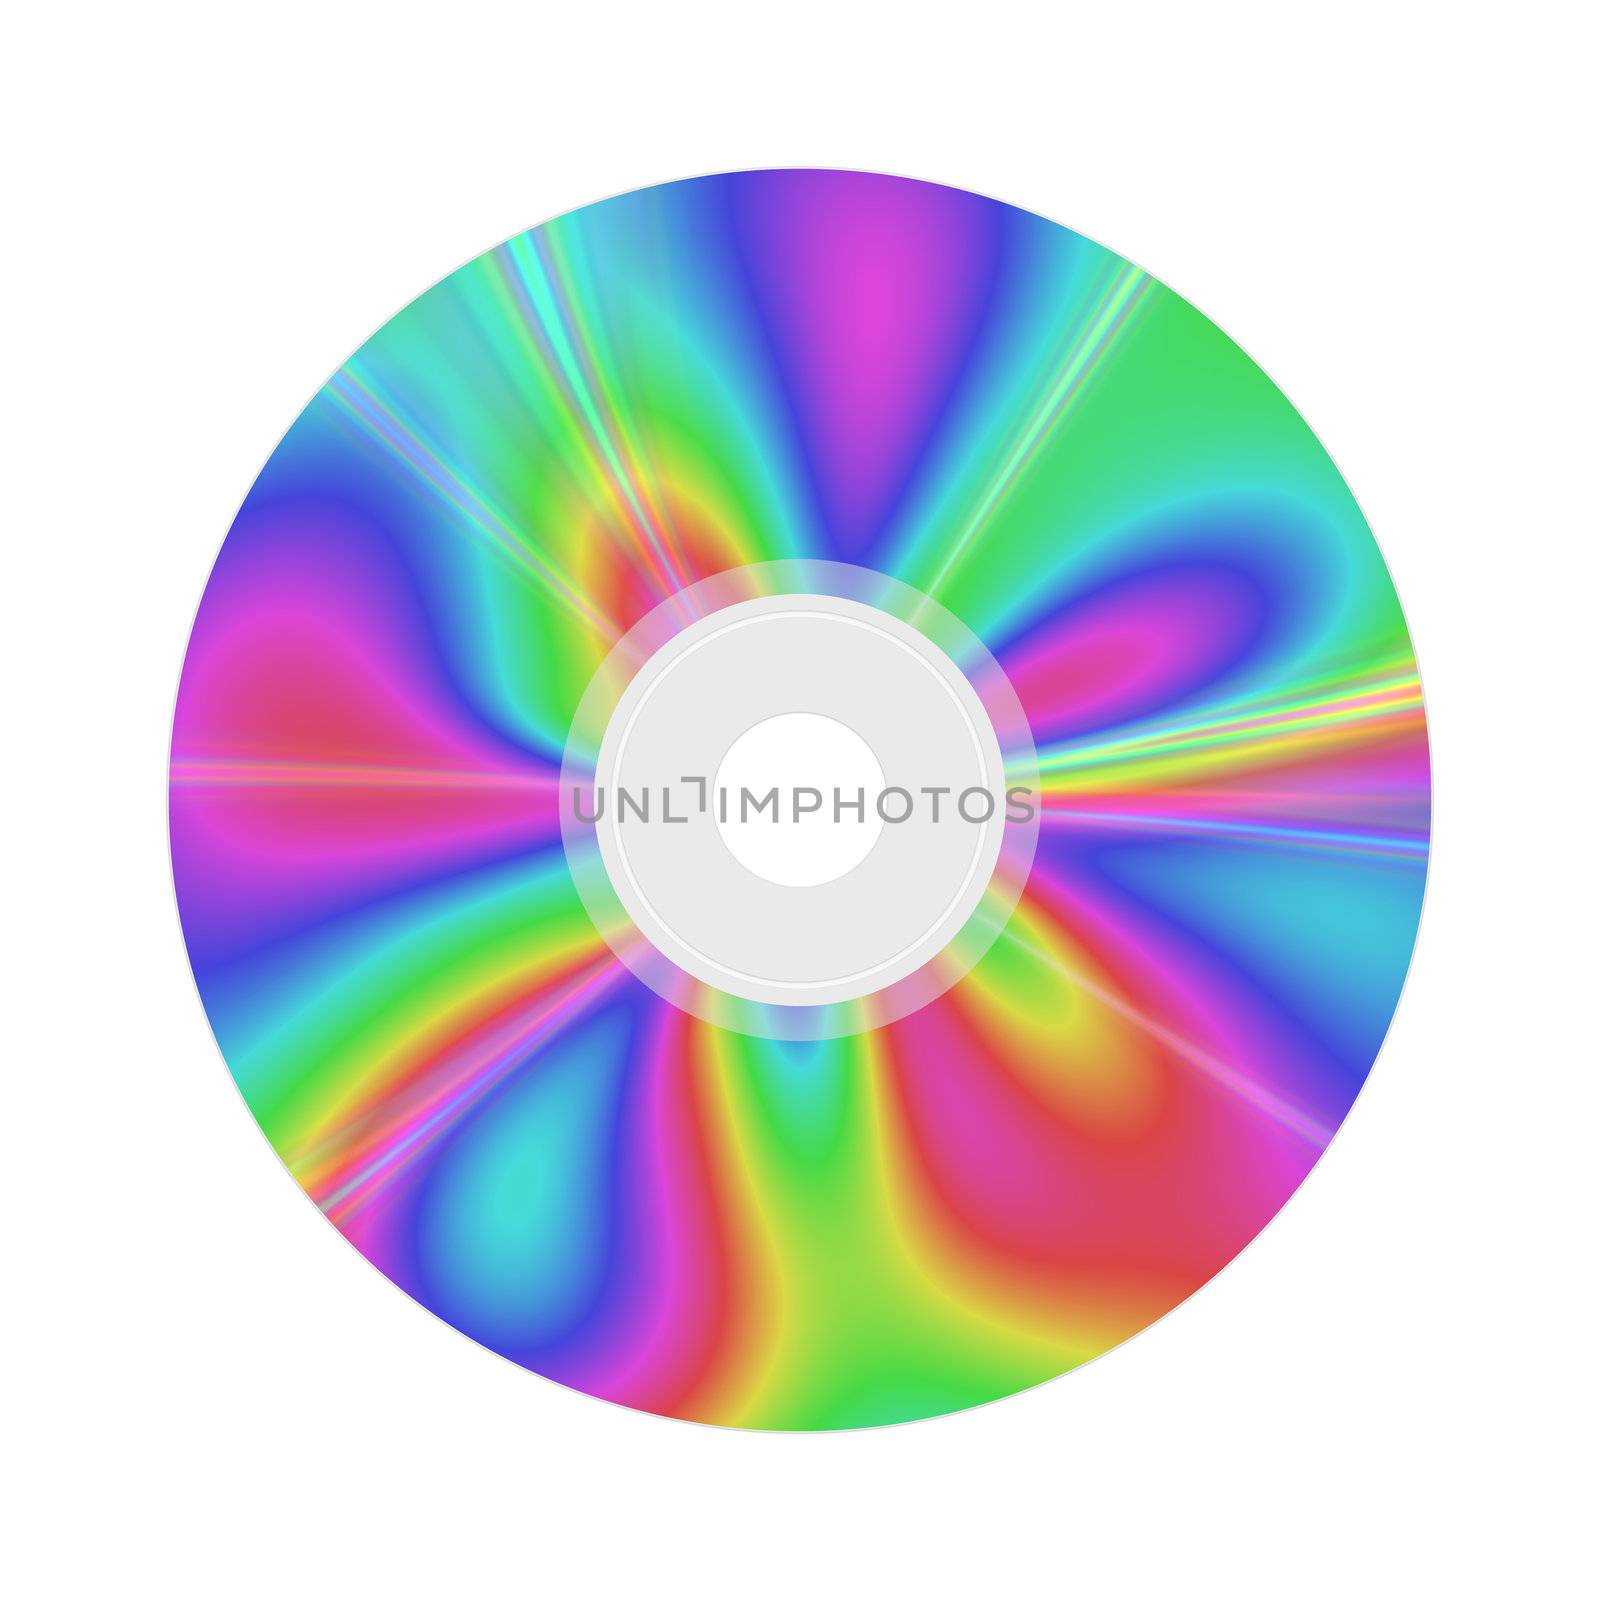 An image of a nice colors compact disc